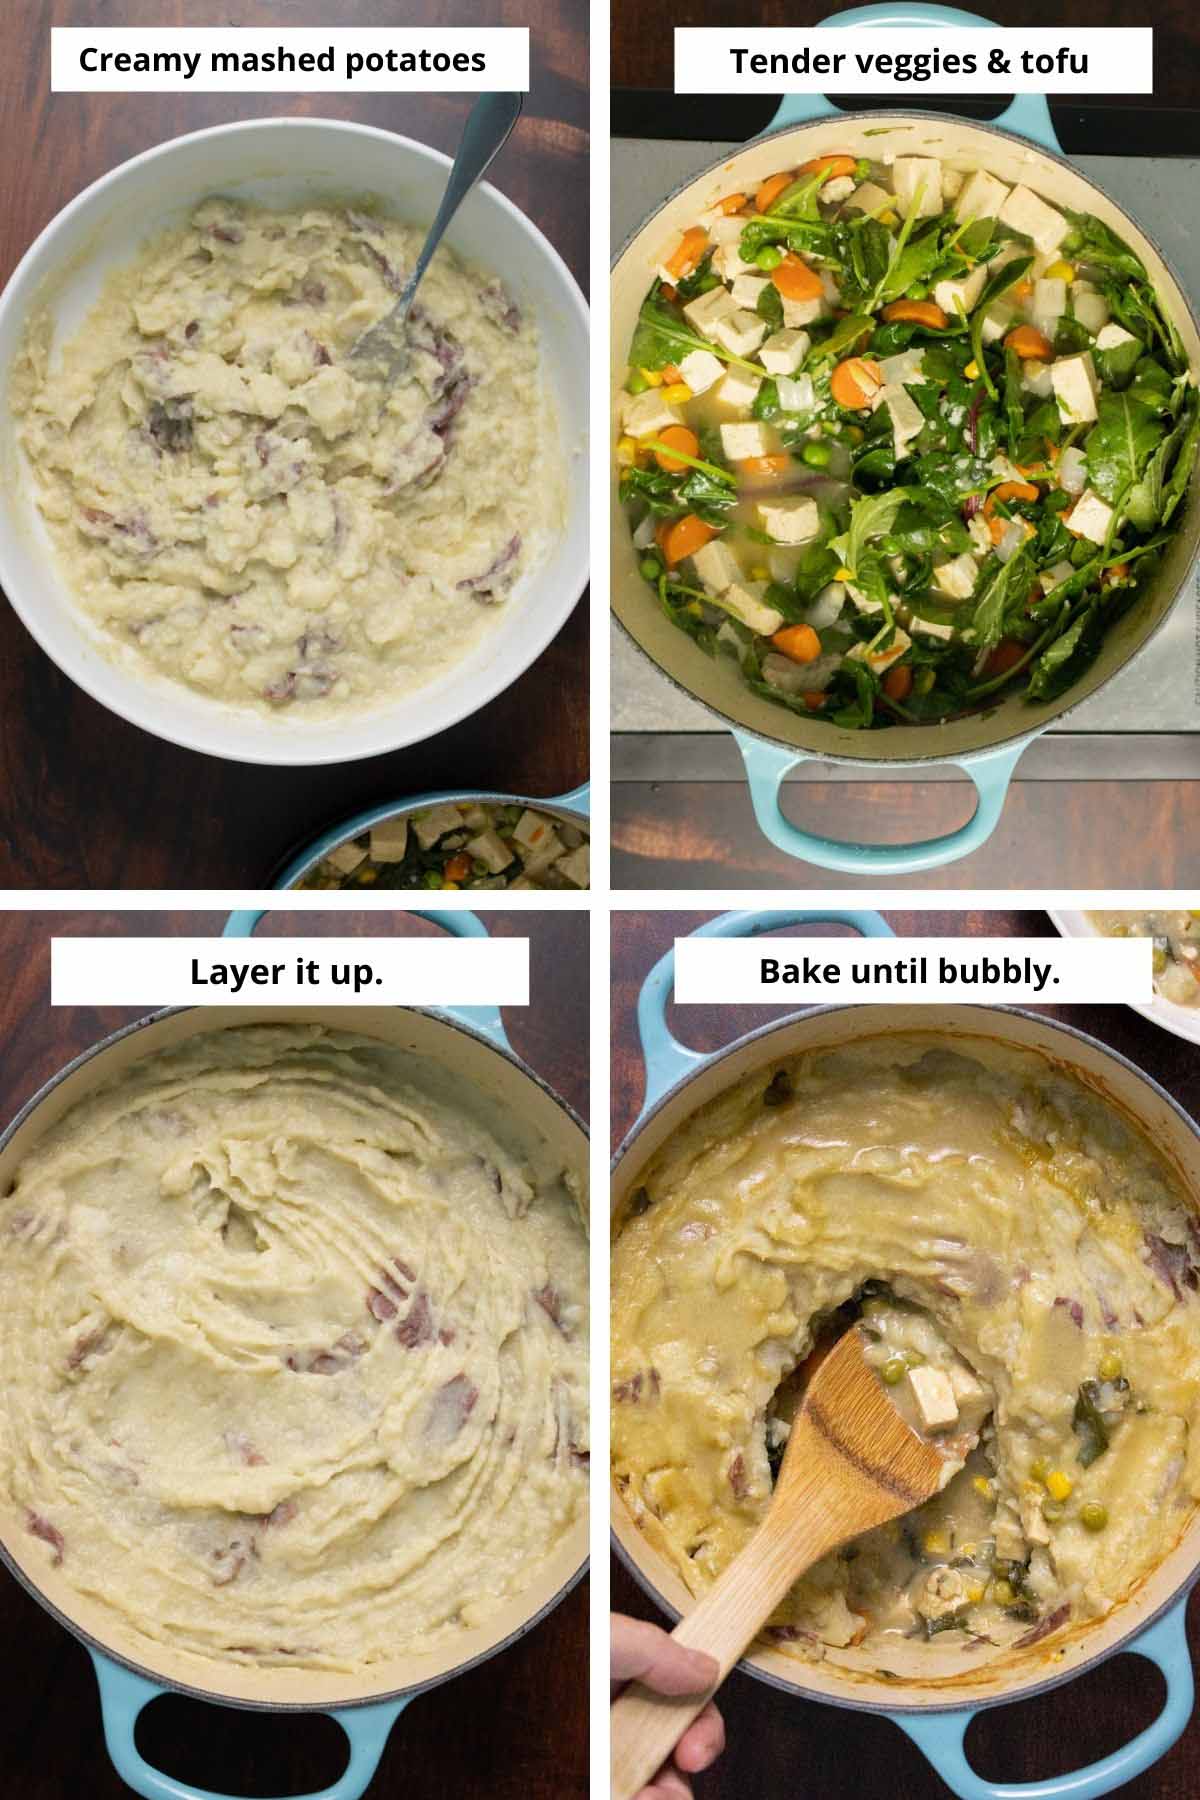 image collage showing mashed potatoes, veggie and tofu filling, tofu spread on top of the casserole, and serving the tofu shepherd's pie